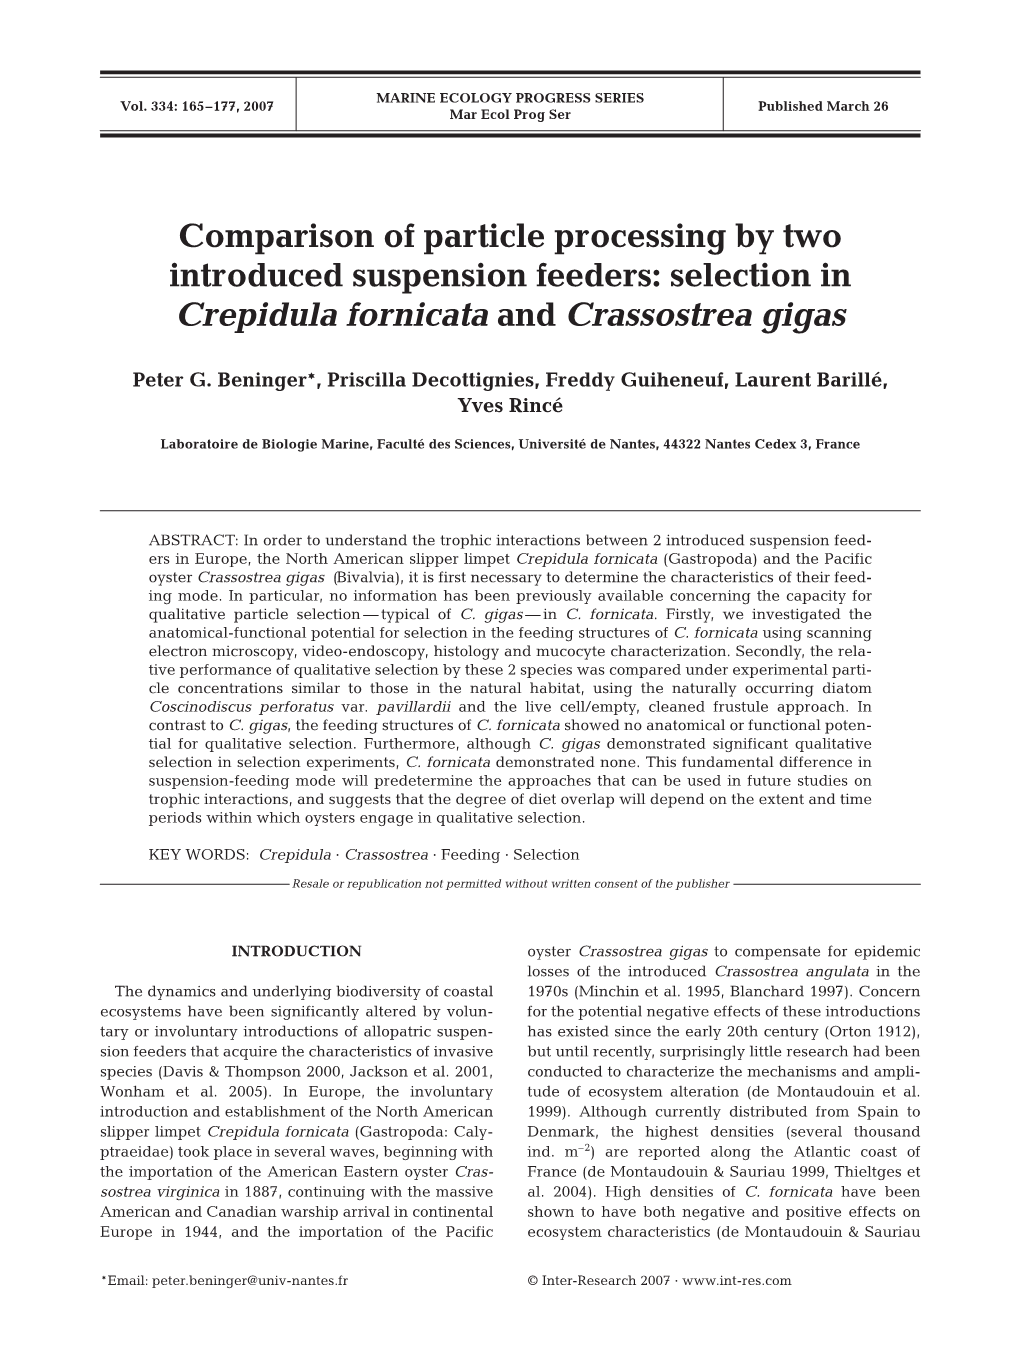 Comparison of Particle Processing by Two Introduced Suspension Feeders: Selection in Crepidula Fornicata and Crassostrea Gigas